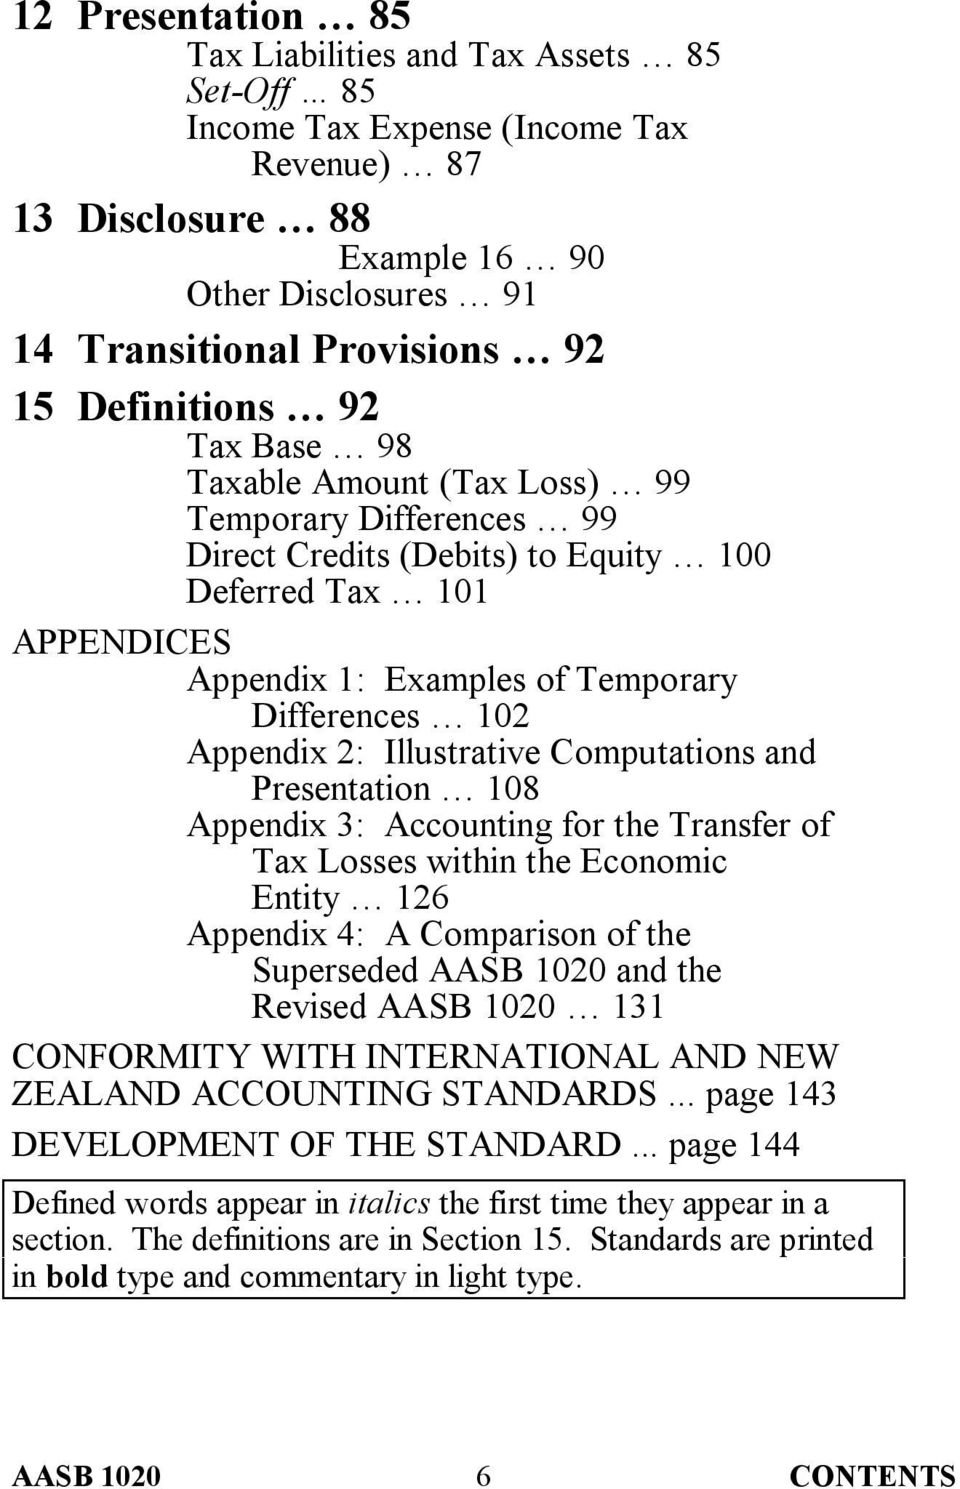 Appendix 2: Illustrative Computations and Presentation 108 Appendix 3: Accounting for the Transfer of Tax Losses within the Economic Entity 126 Appendix 4: A Comparison of the Superseded AASB 1020